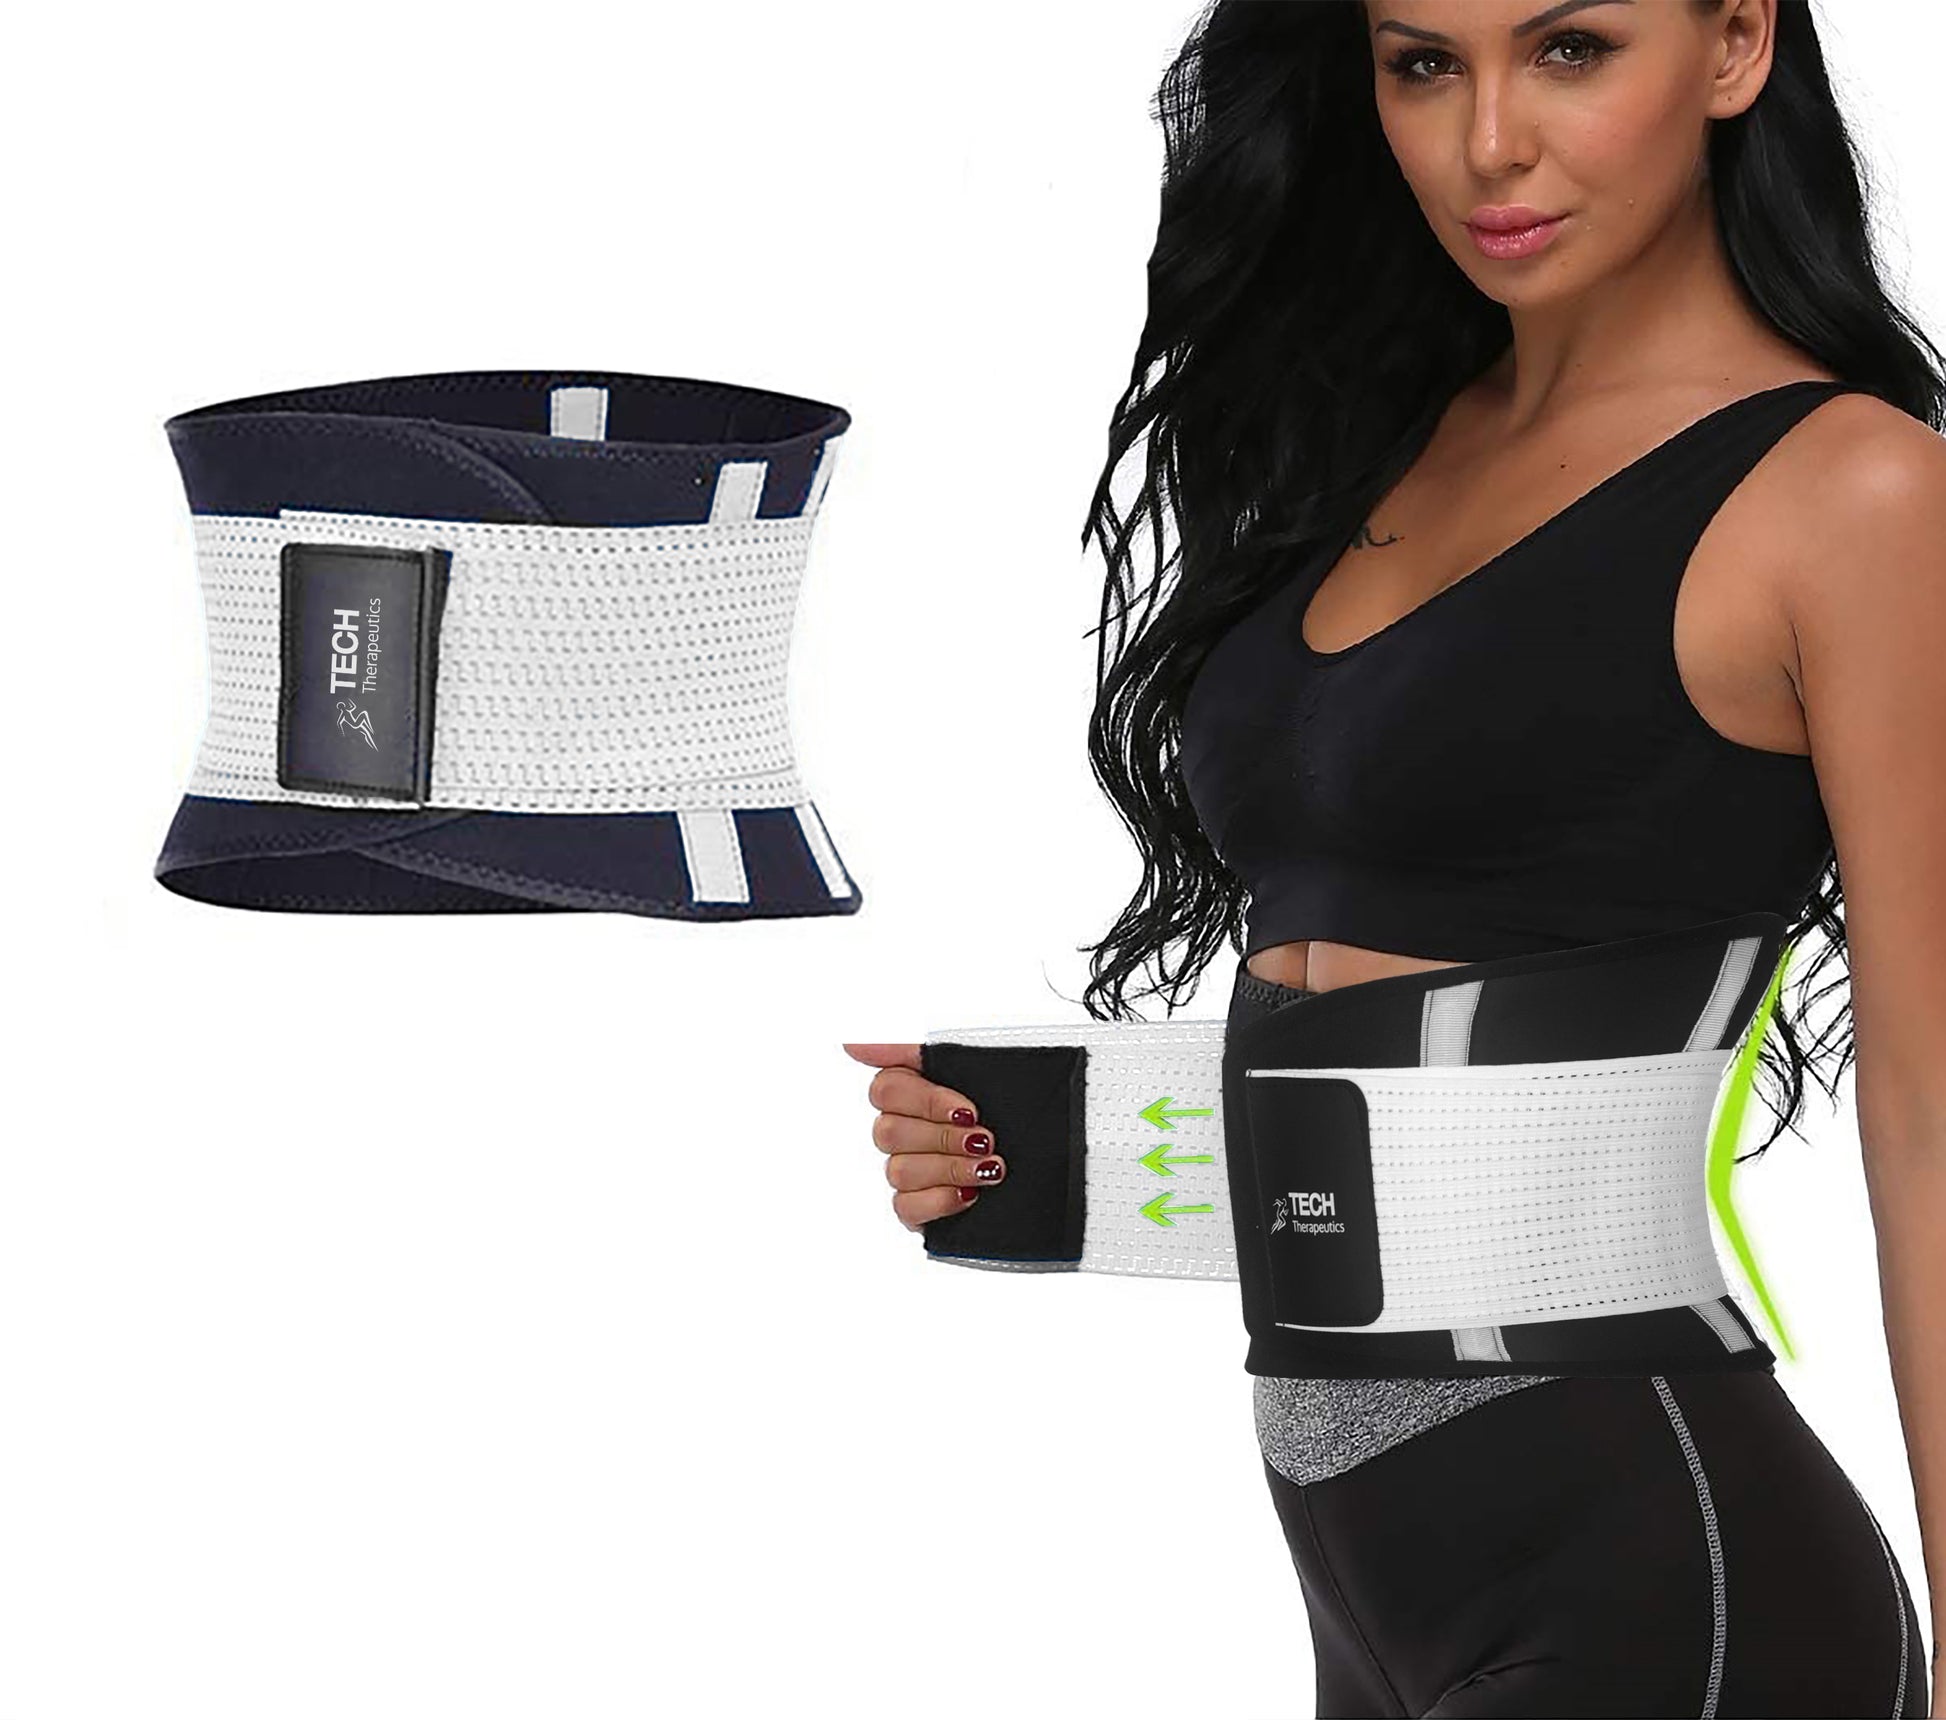 Pellitory Lumbar Spine Pain relief Back Support Belt Therapy Upper Lower  Back Pain Relief Back / Lumbar Support - Buy Pellitory Lumbar Spine Pain  relief Back Support Belt Therapy Upper Lower Back